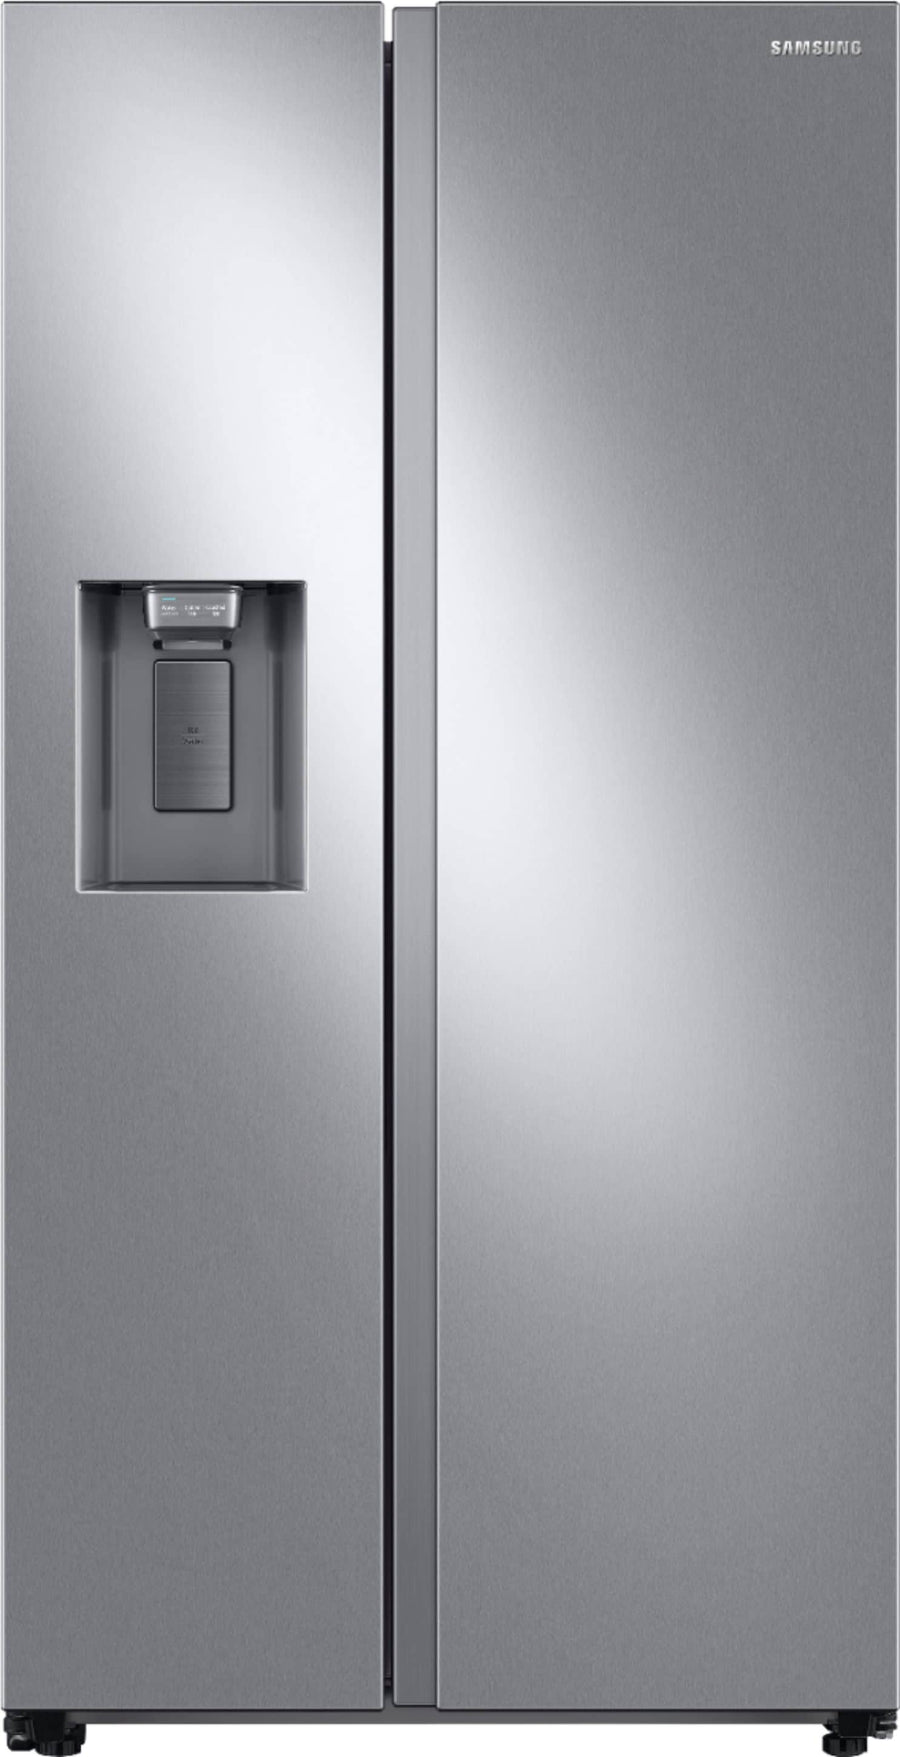 Samsung - 22 Cu. Ft. Side-by-Side Counter-Depth Refrigerator - Stainless steel_0